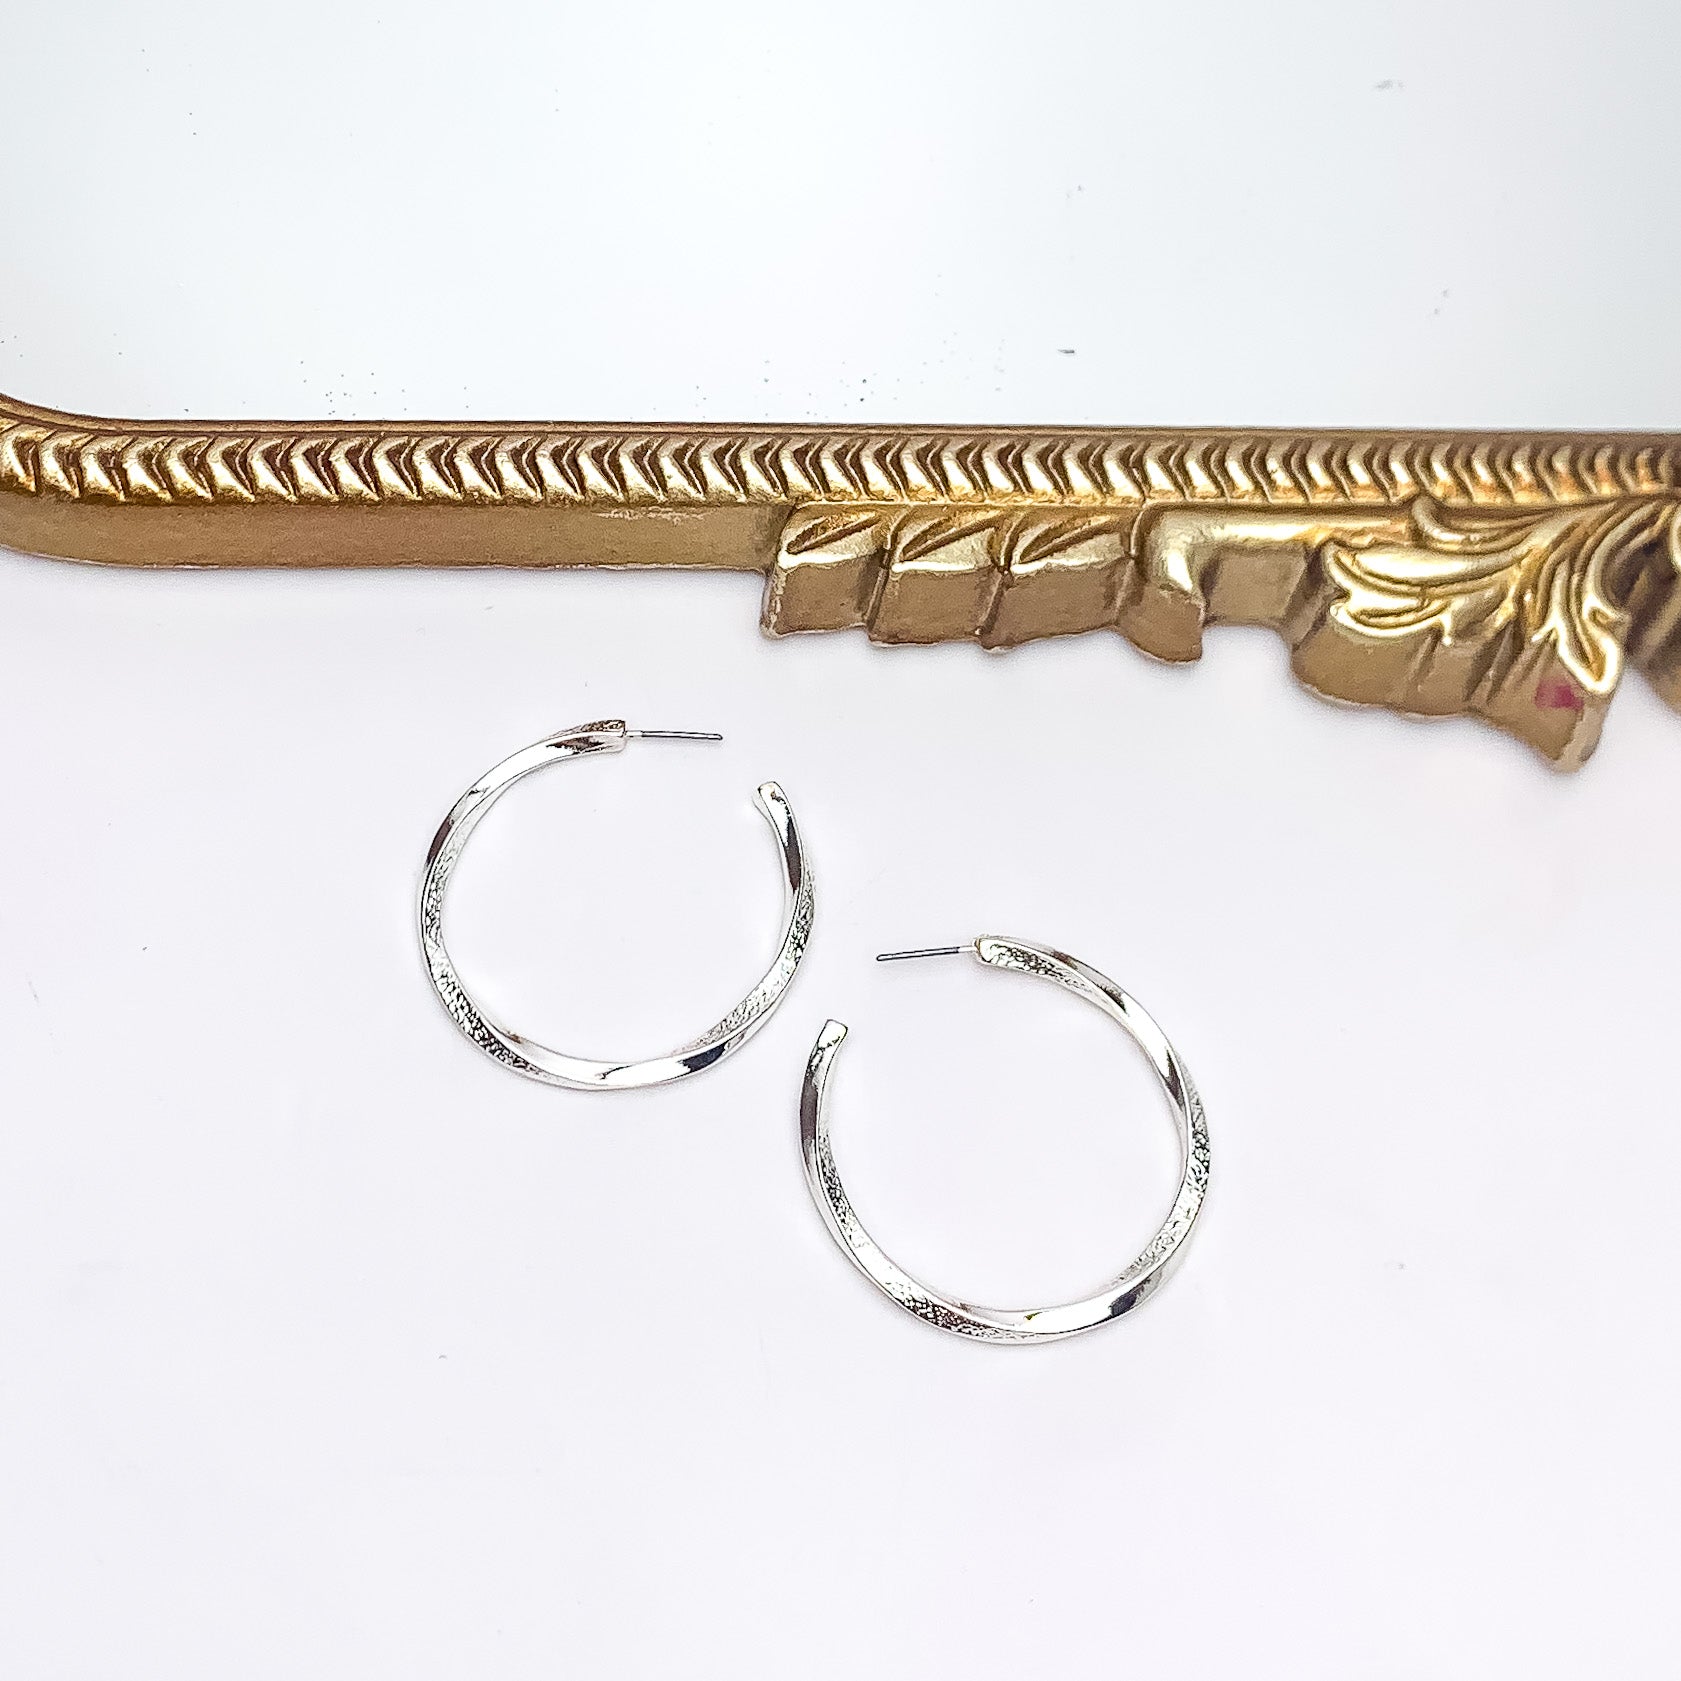 City Day Large Silver Tone Hoop Earrings. Pictured on a white background with a gold frame above the earrings.